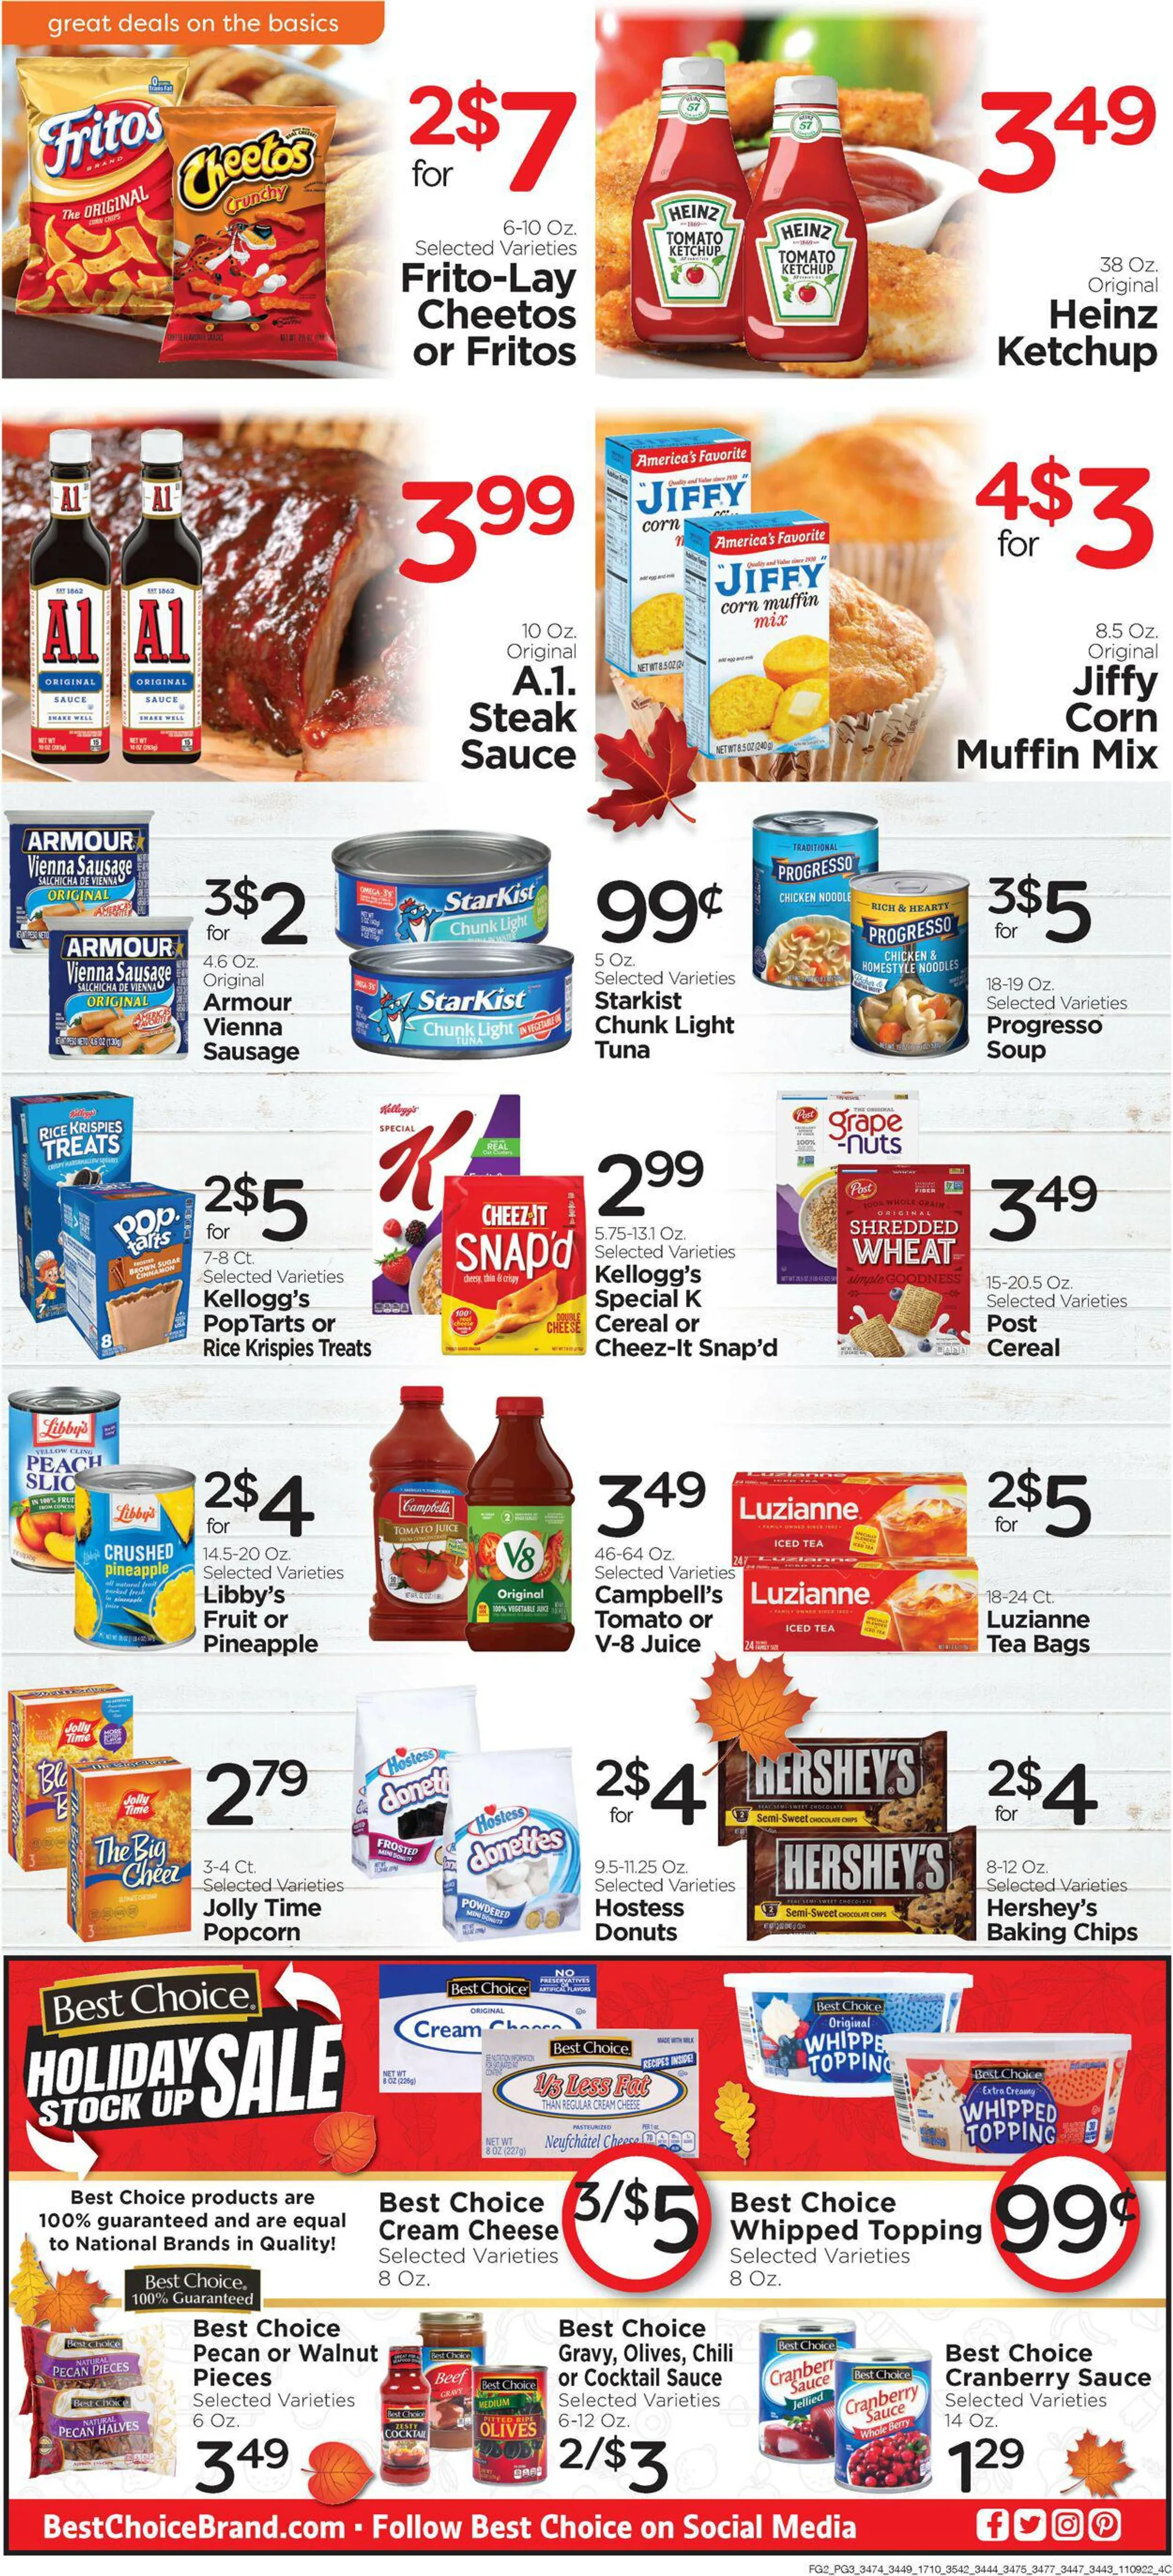 Edwards Food Giant Current weekly ad - 3